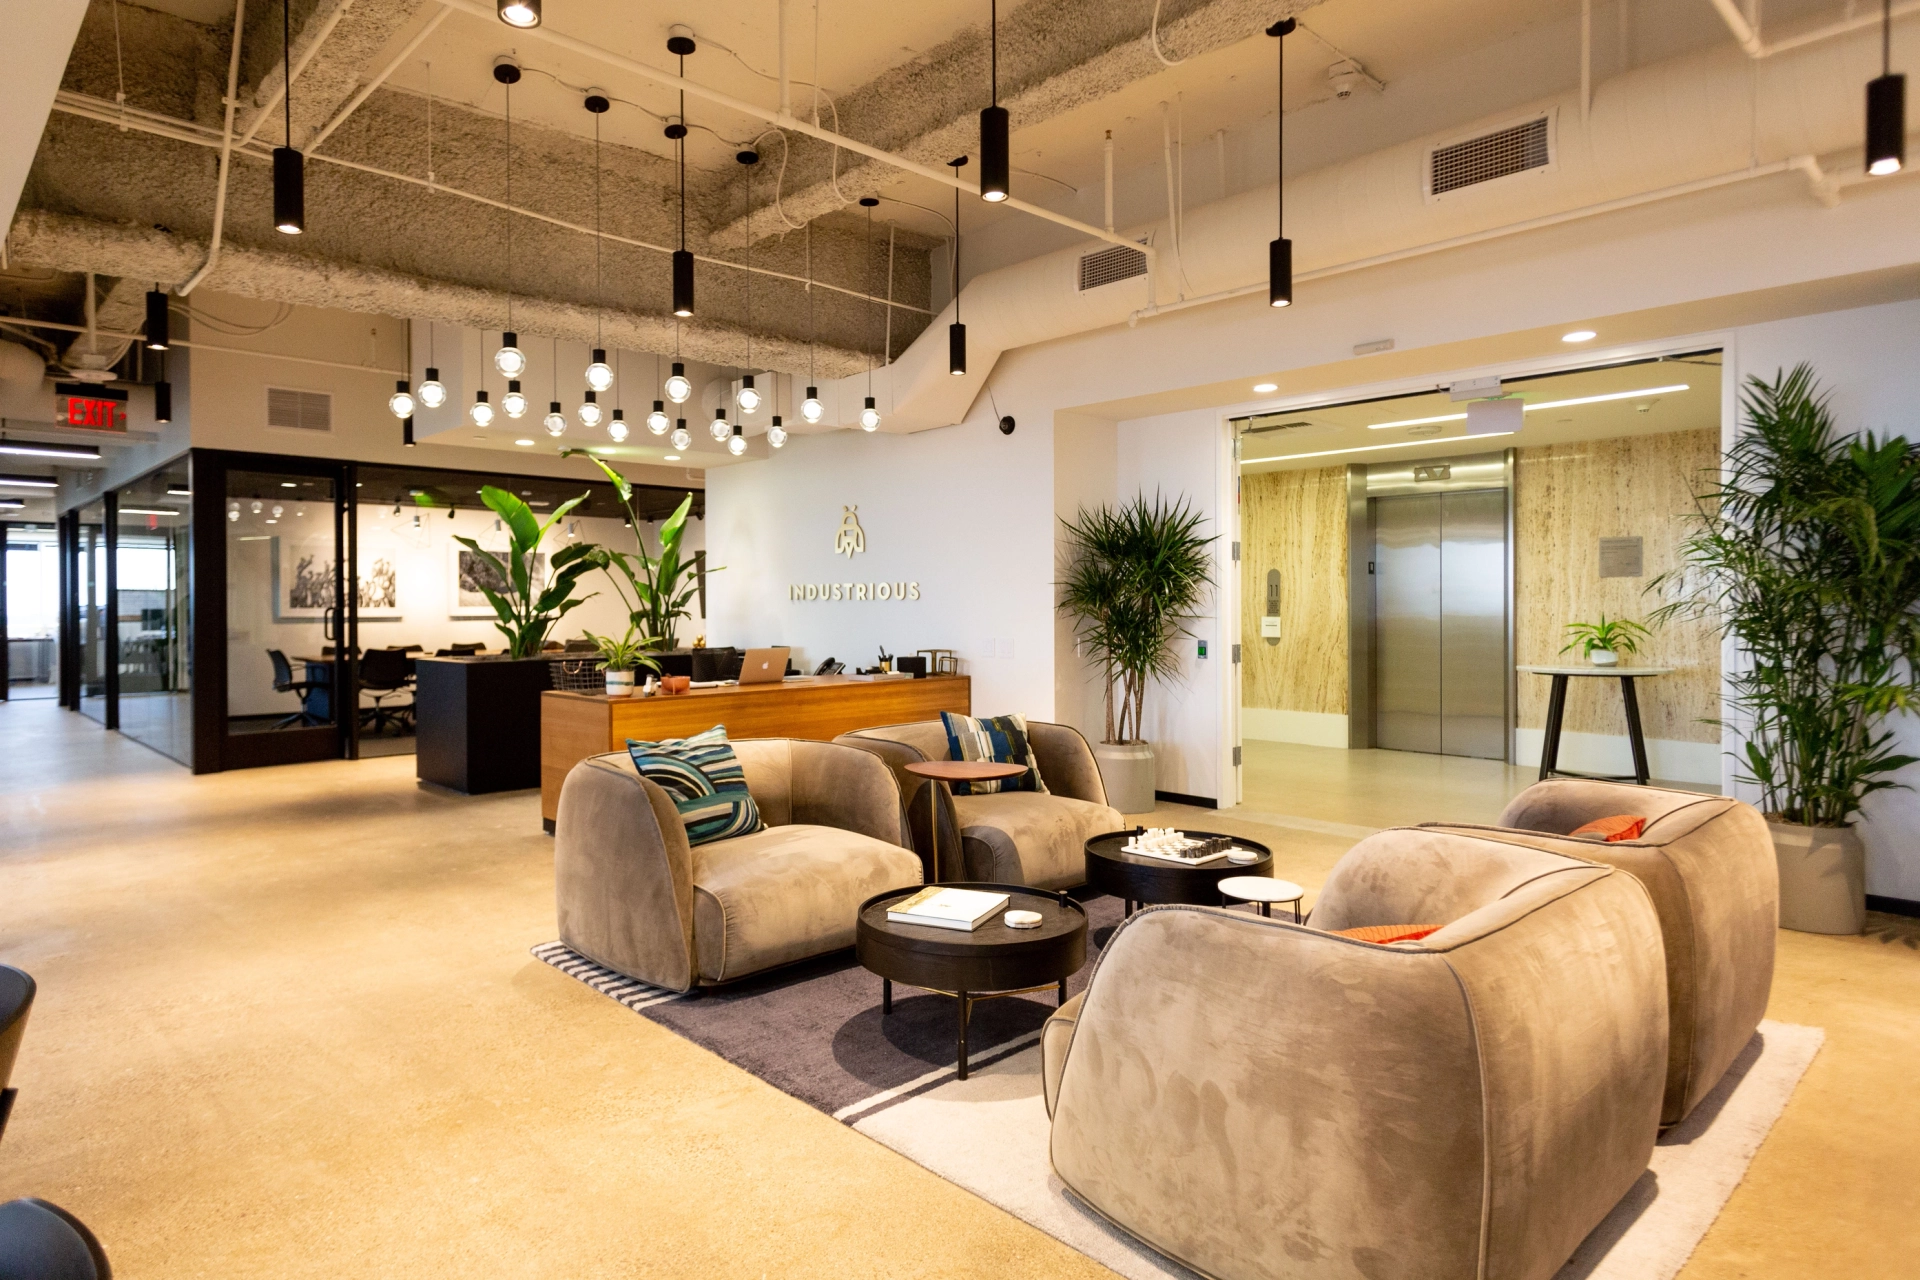 A modern office lobby with cozy couches, vibrant plants, and a welcoming workspace.